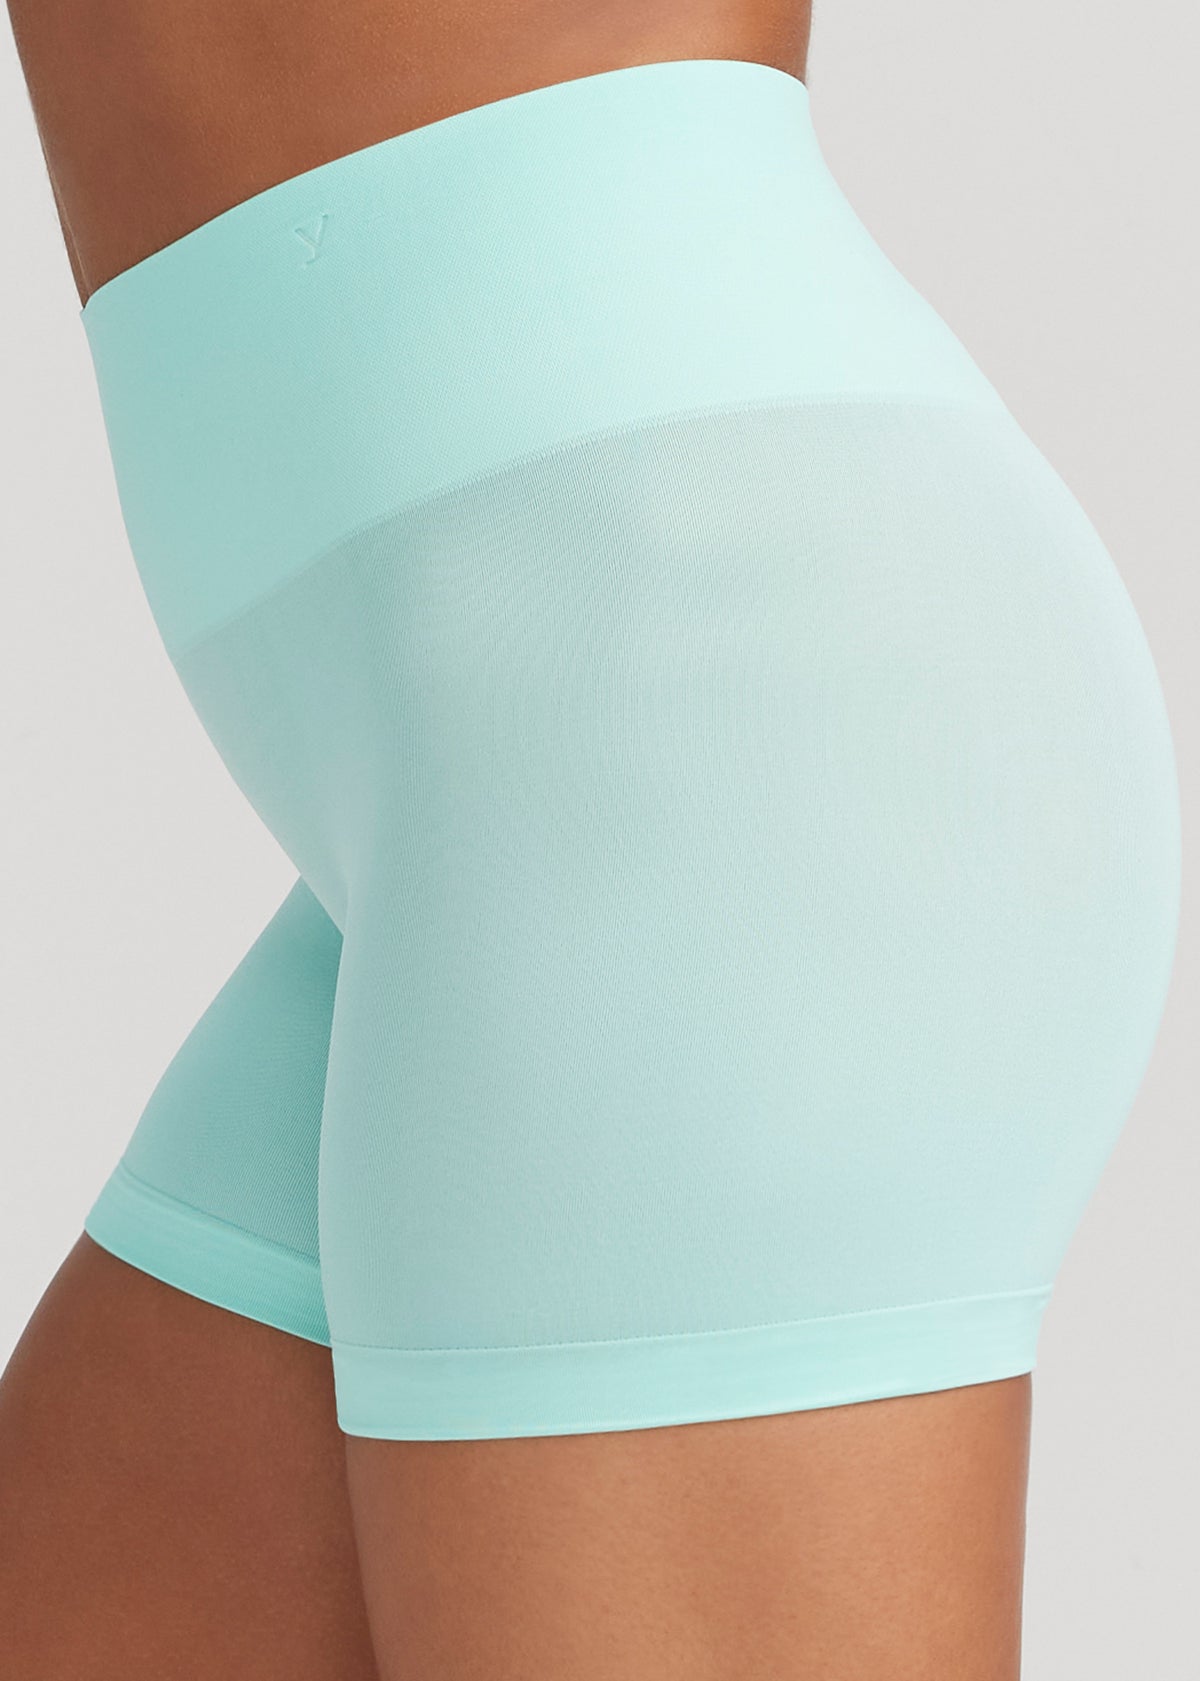 Ultralight Shaping Short - Seamless from Yummie in Beached Glass  - 1